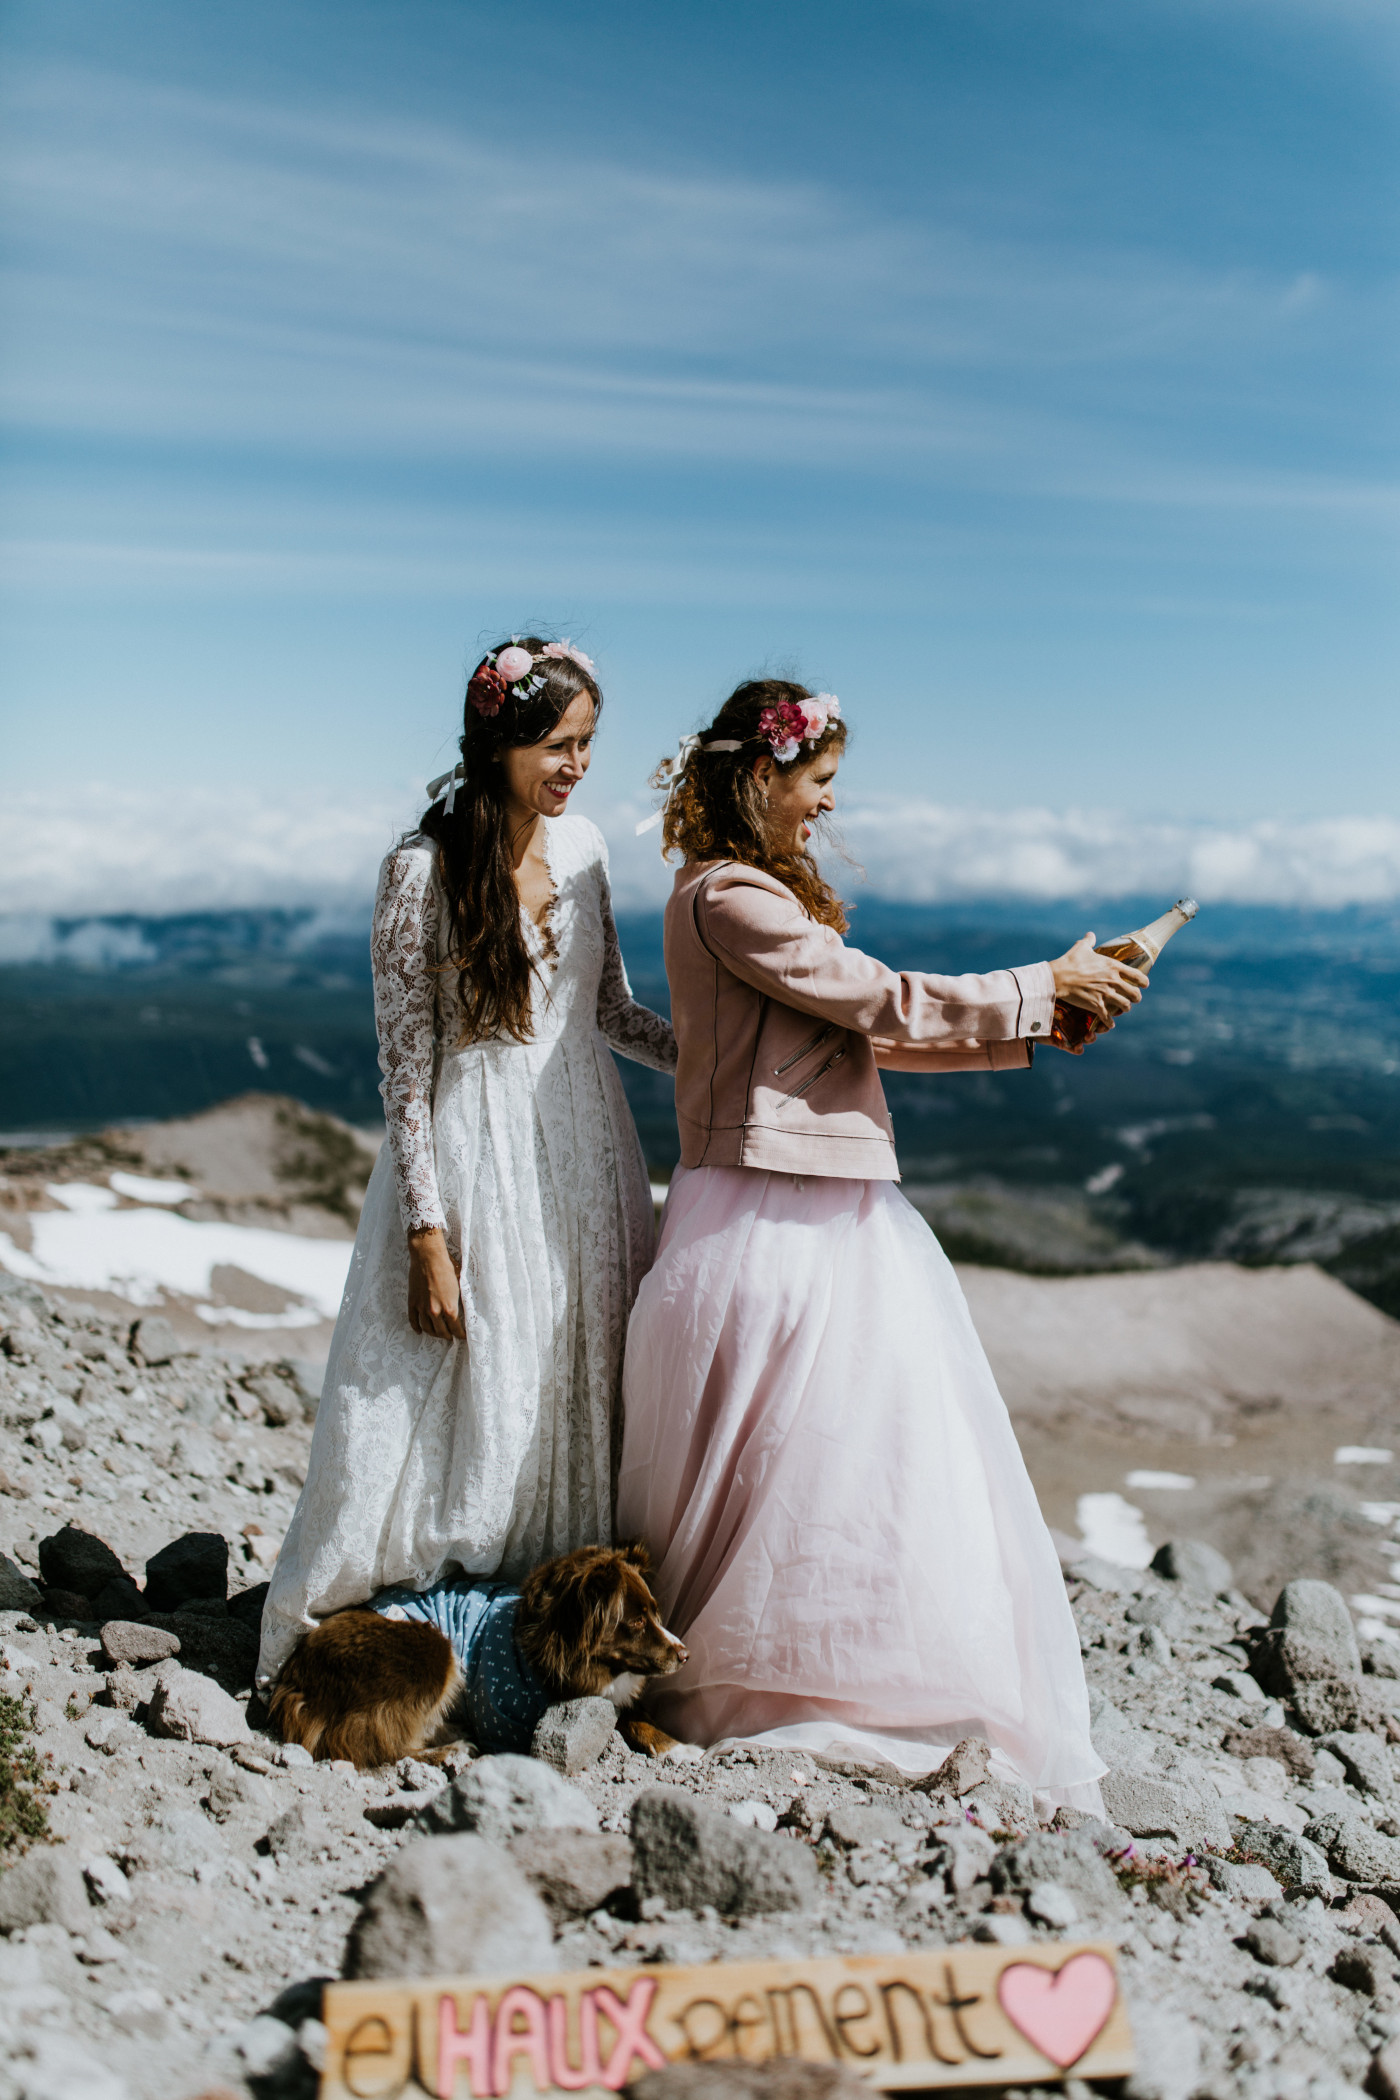 Margaux and Heather pop a bottle of champagne on top of Mount Hood. Elopement photography at Mount Hood by Sienna Plus Josh.